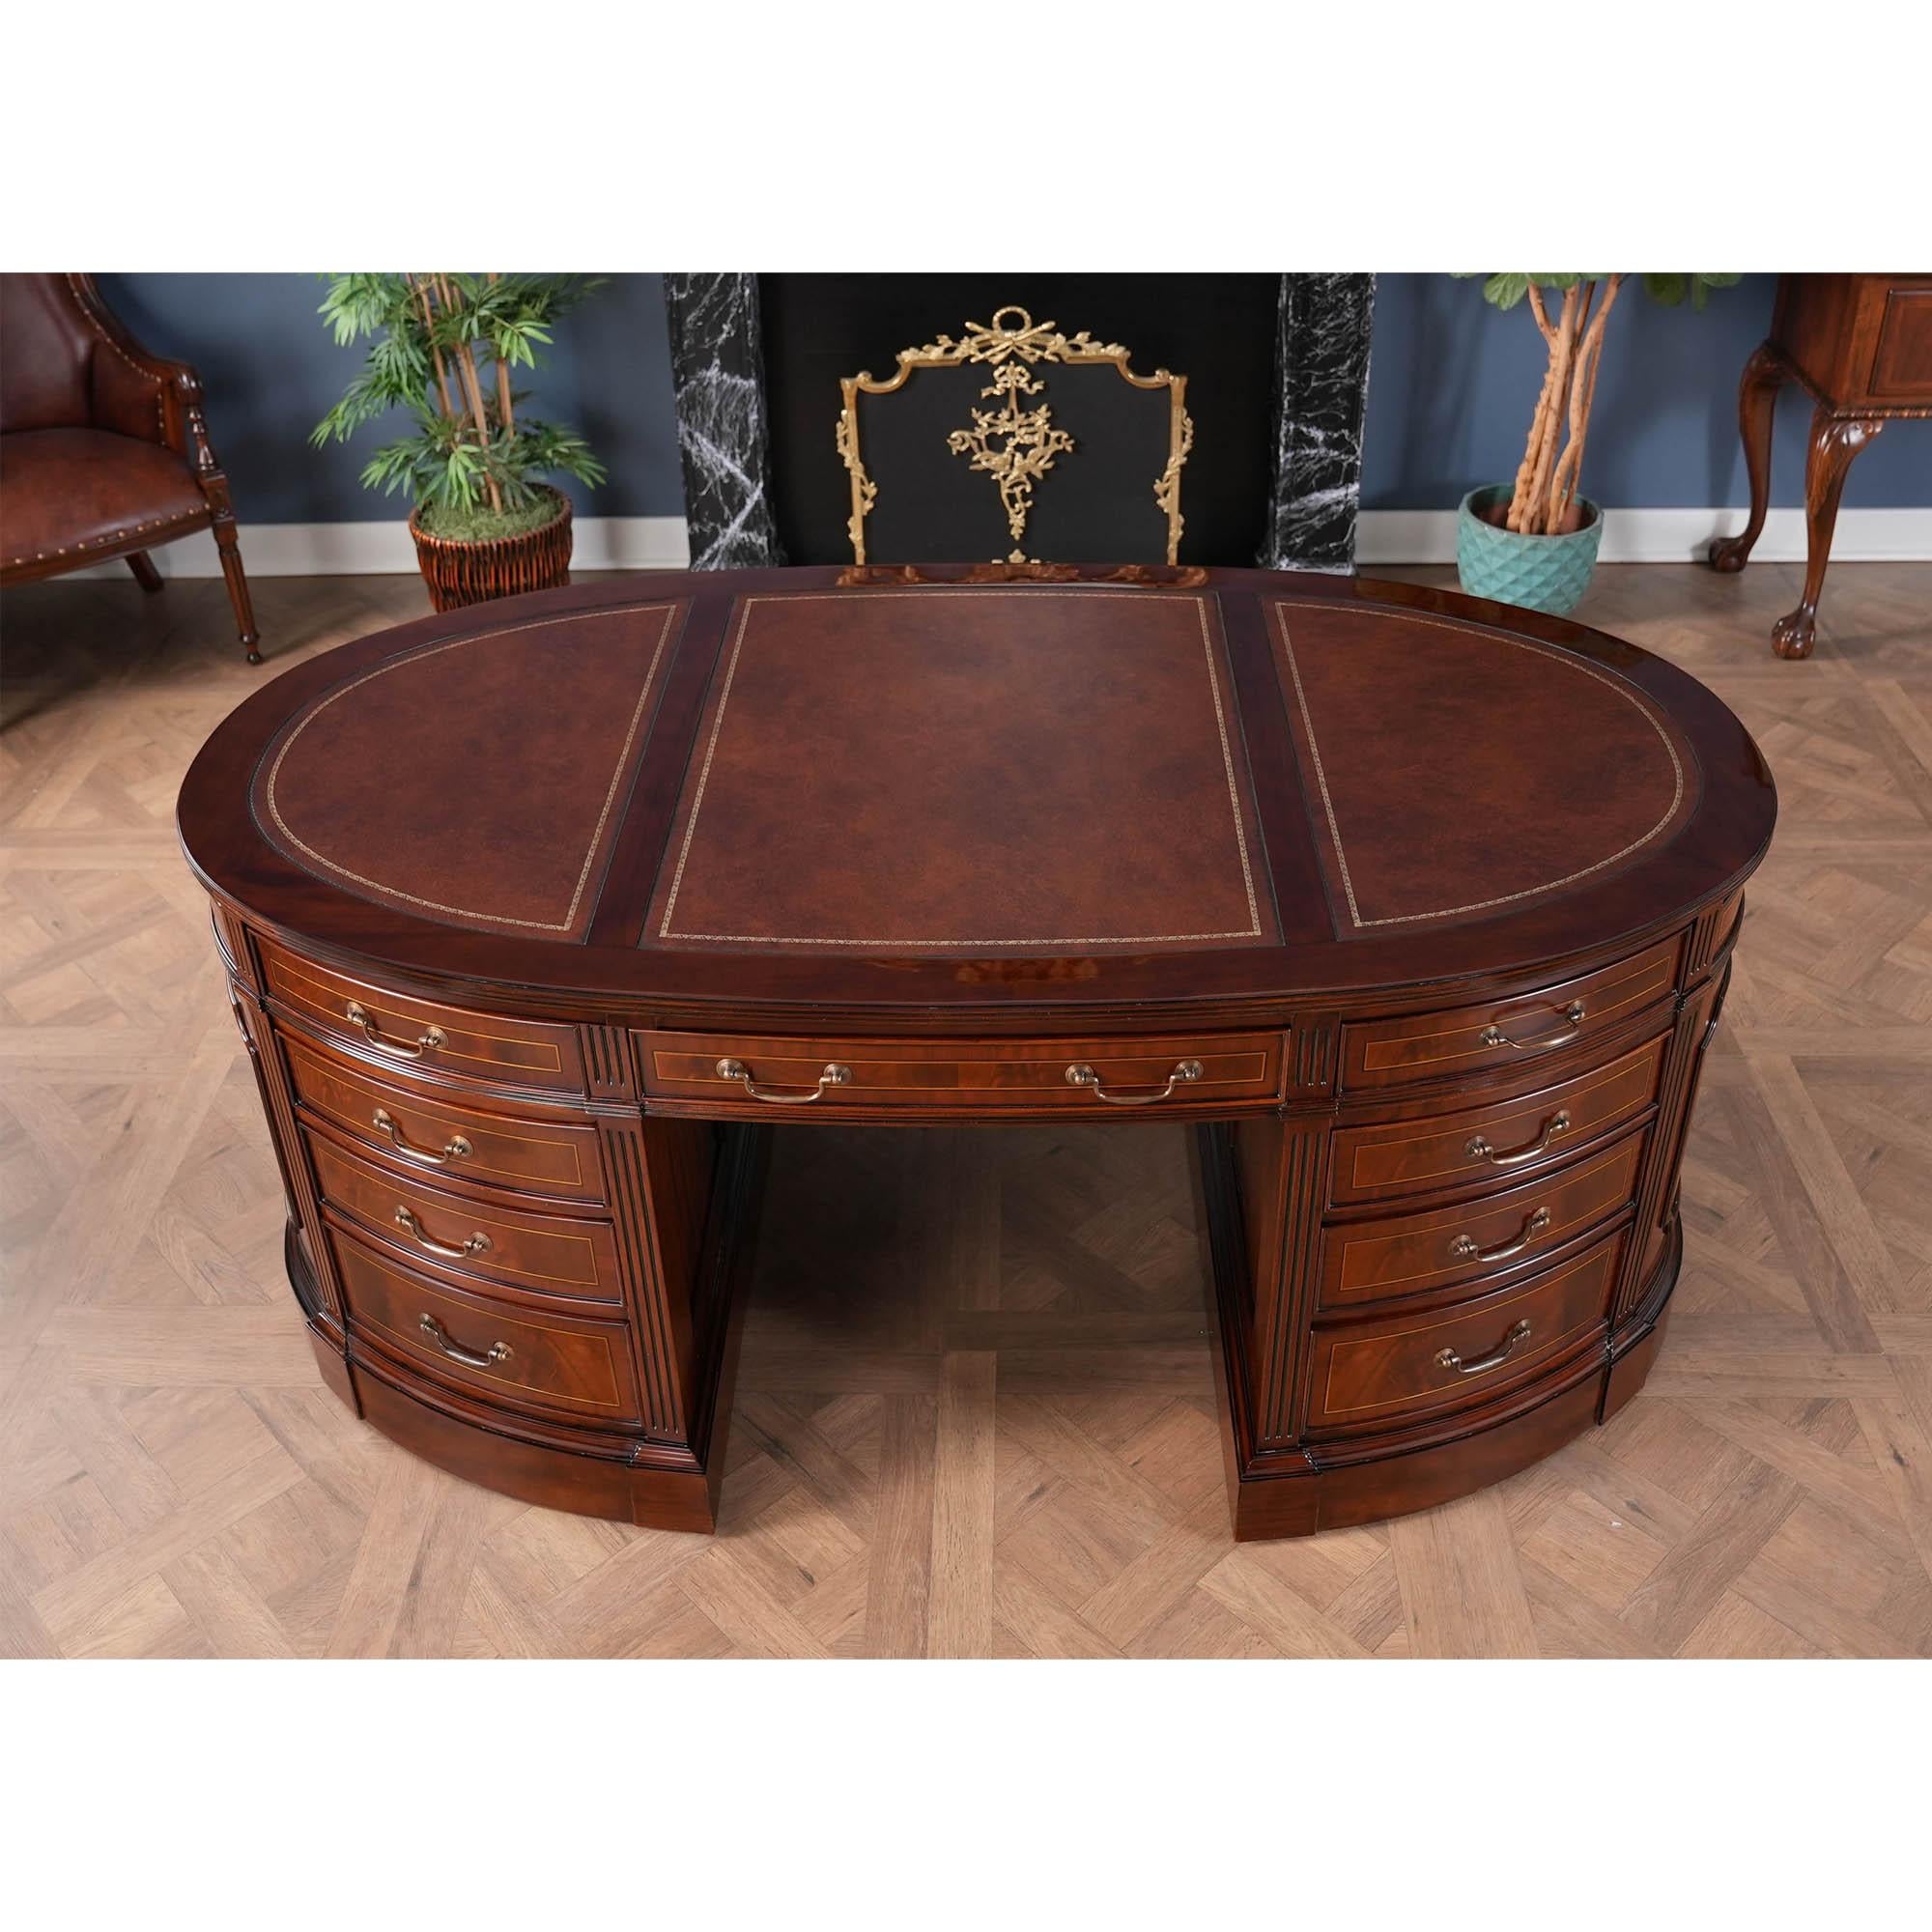 One of the most complicated items that we produce at Niagara furniture our Oval Partners Desk is also one of the most popular. The top section of the desk consists of a three-paneled writing surfaces of brown full grain genuine leather which feature